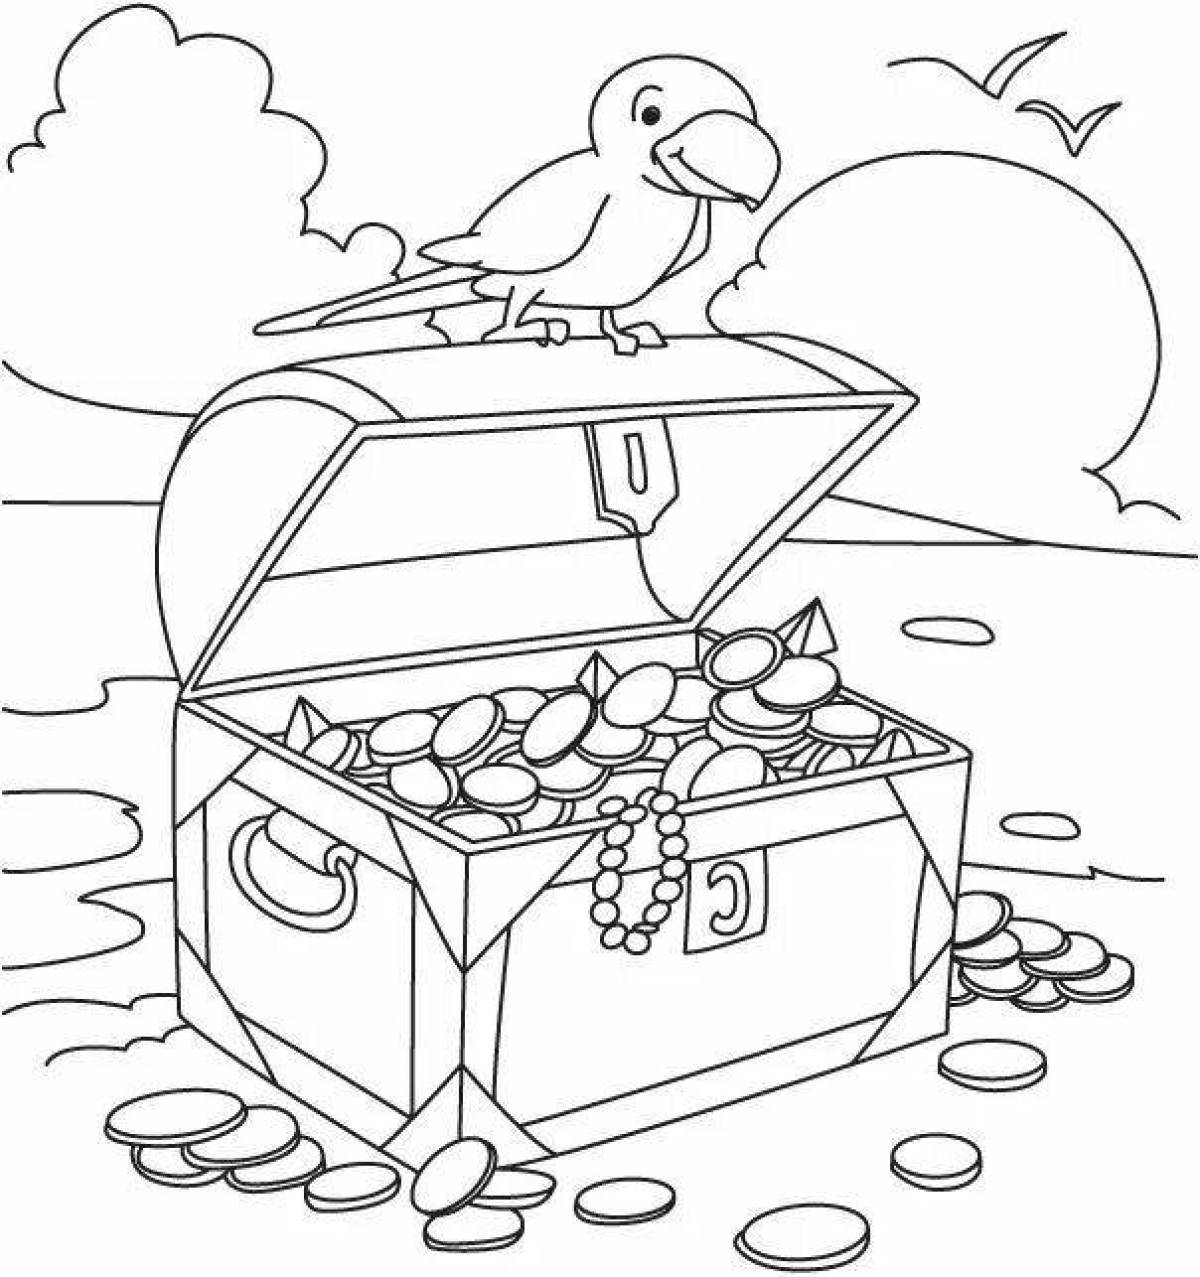 Gorgeous treasure chest coloring page